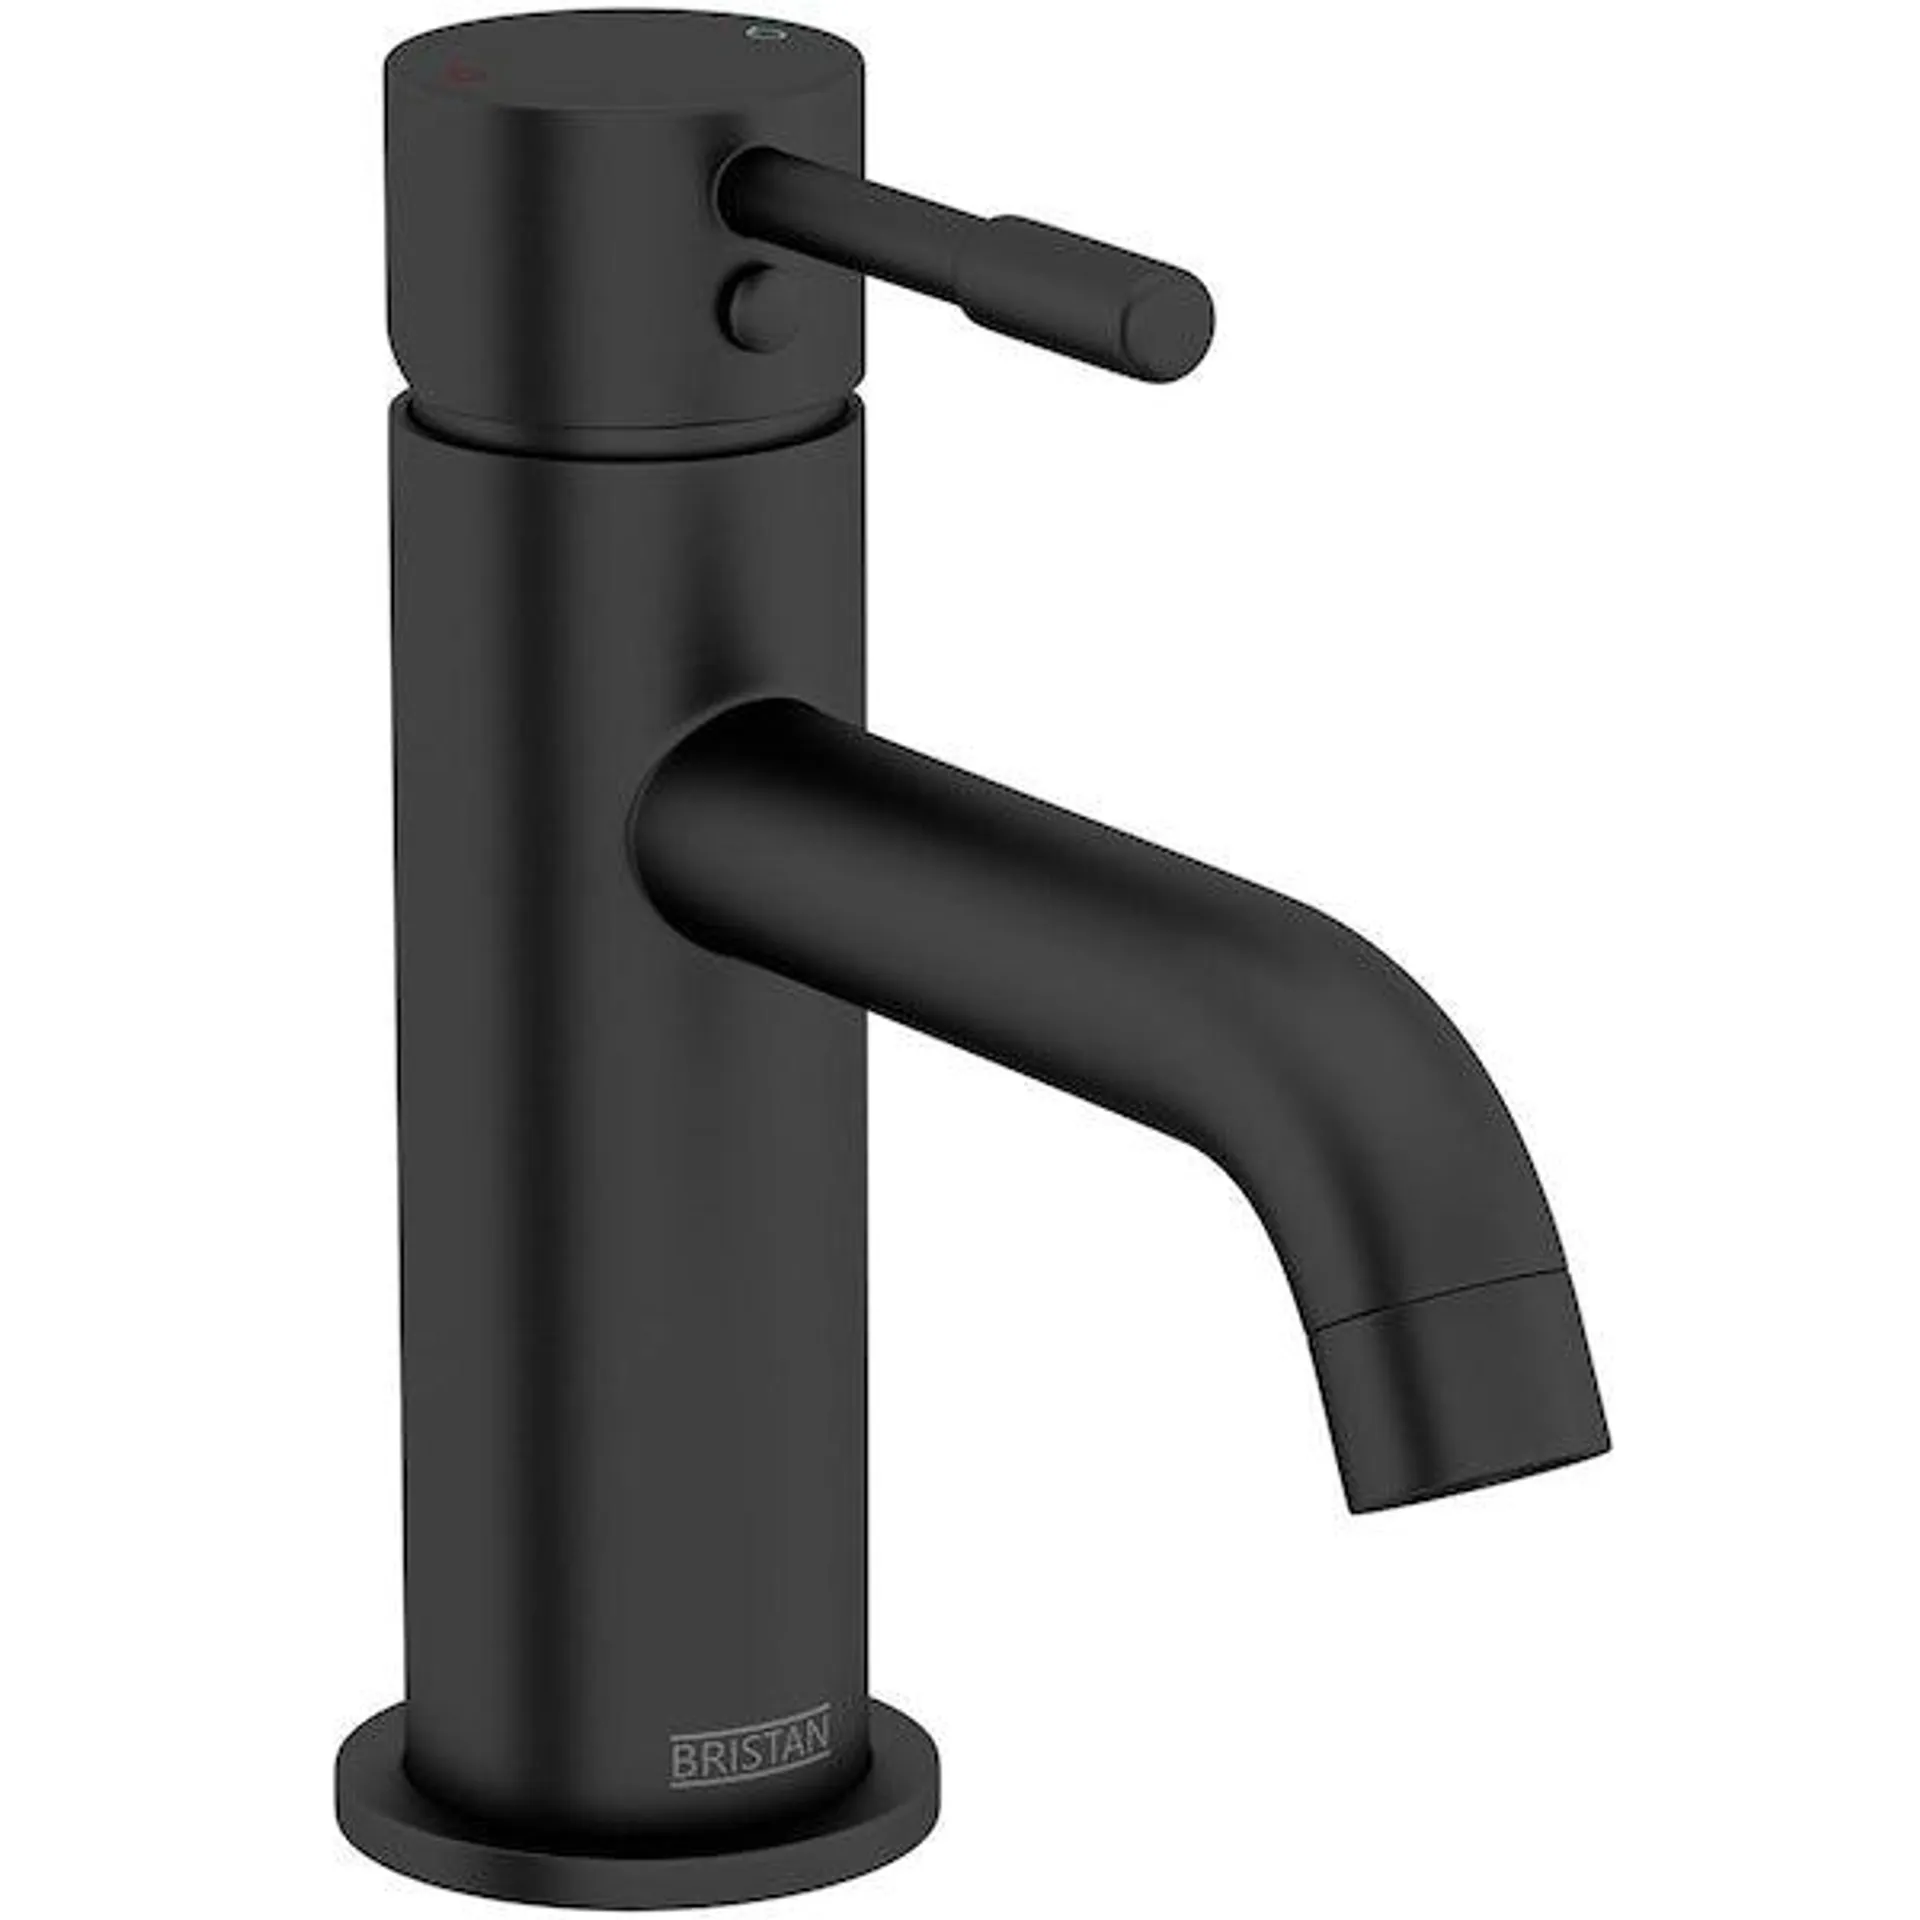 Mila black basin mixer tap with waste